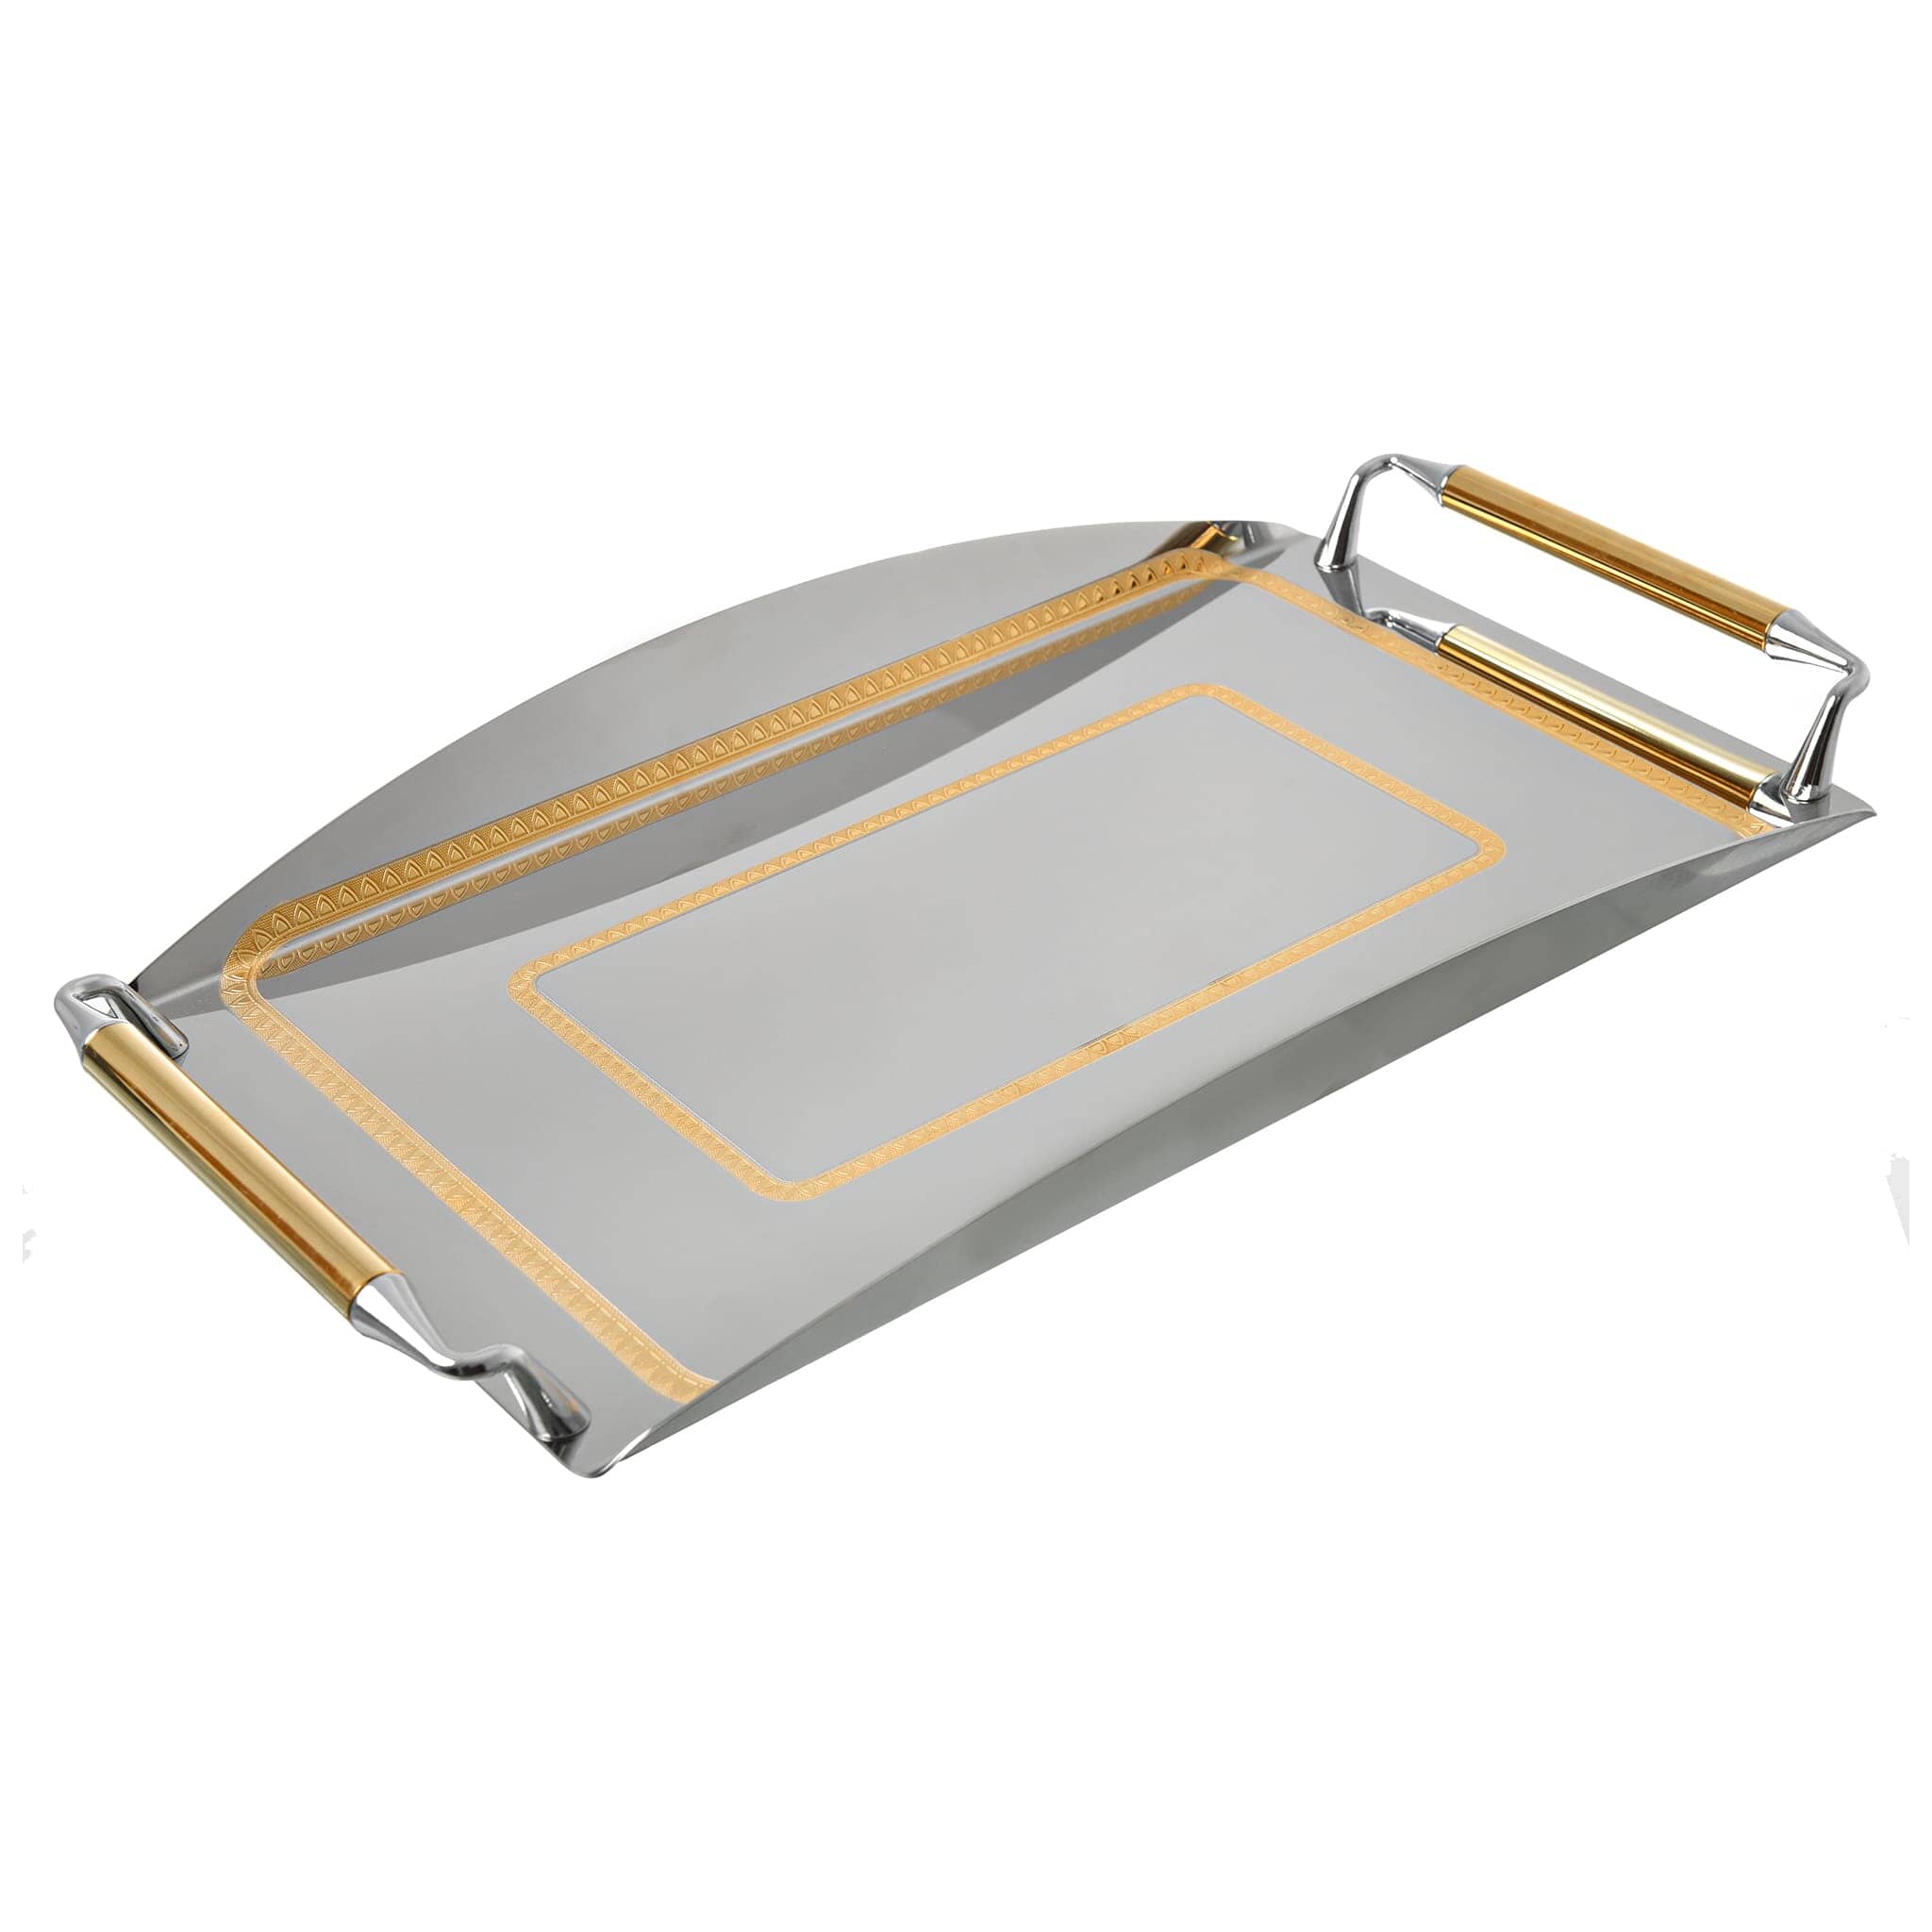 Elegant Gioiel - Rectangular Tray with Handles - Gold - Stainless Steel 18/10 - 26x40cm - 75000479